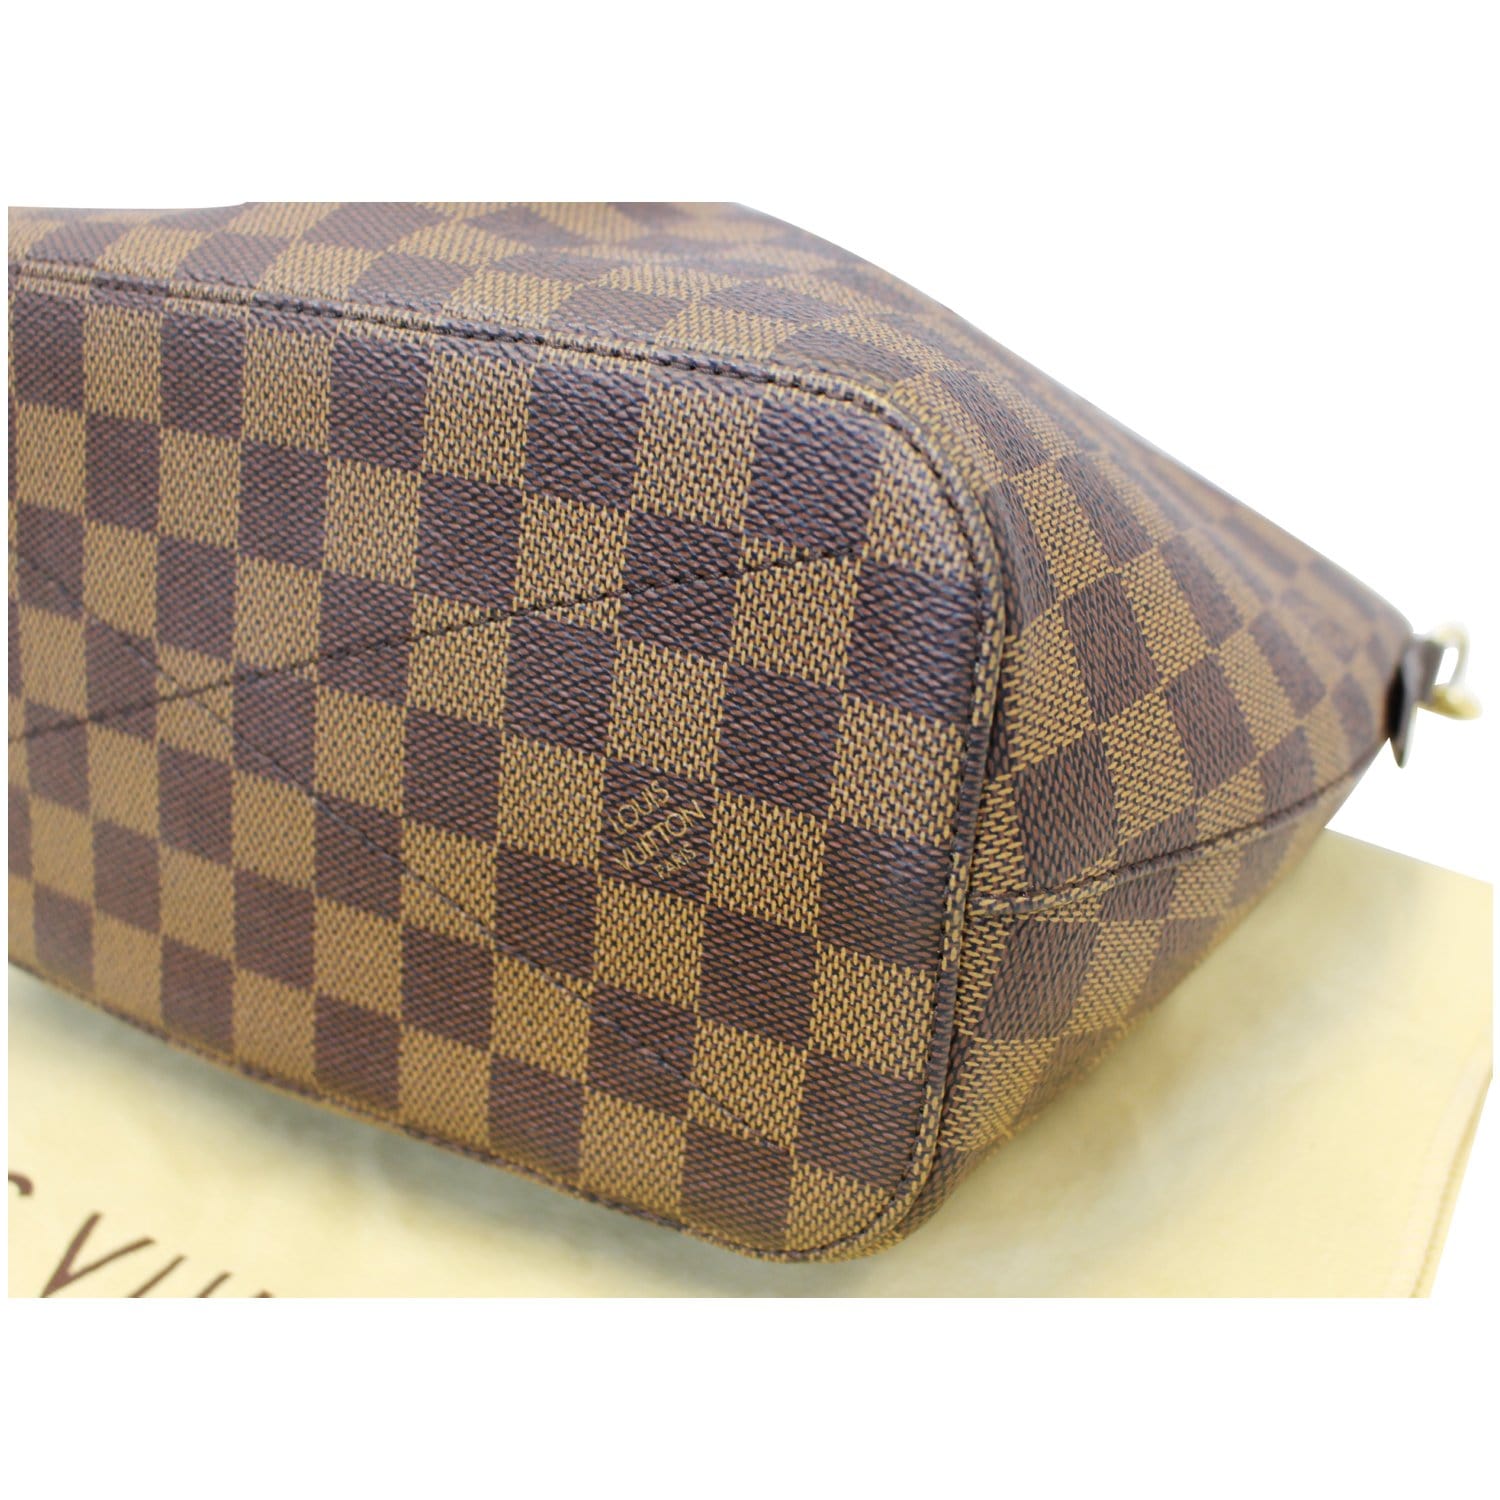 Naughtipidgins Nest - Louis Vuitton Siena PM in Damier Ebene. Curvy  billowing pleats, a pretty, feminine silhouette the shape is softly  structured but still supple. Light to carry and a perfect, neat